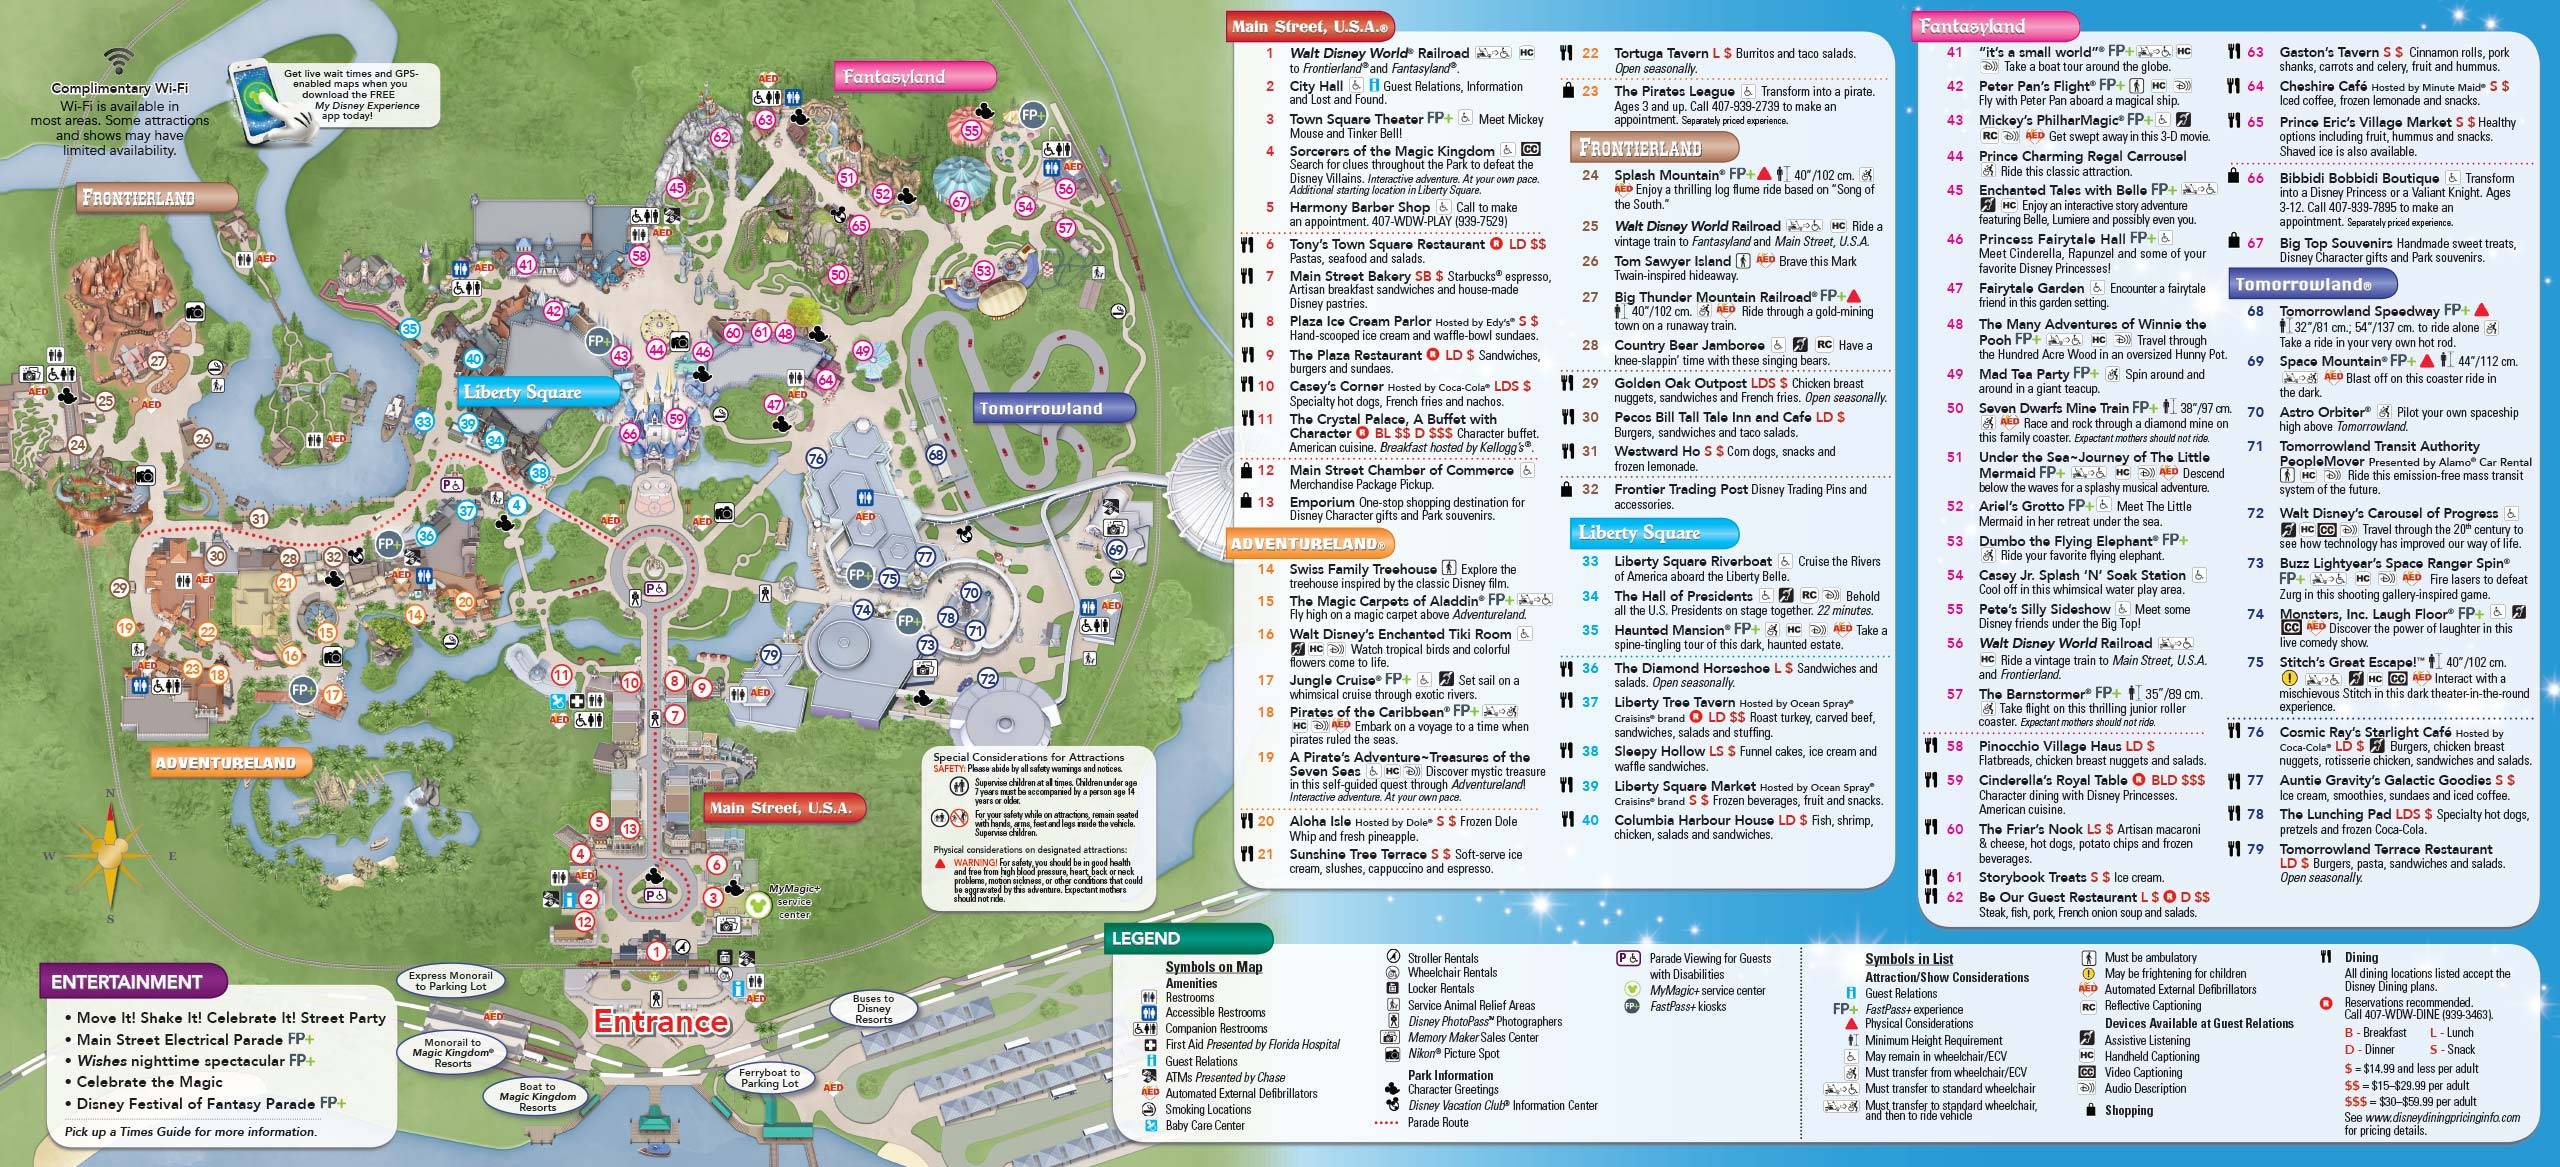 PHOTOS - Seven Dwarfs Mine Train takes the front cover of the Magic Kingdom guide map